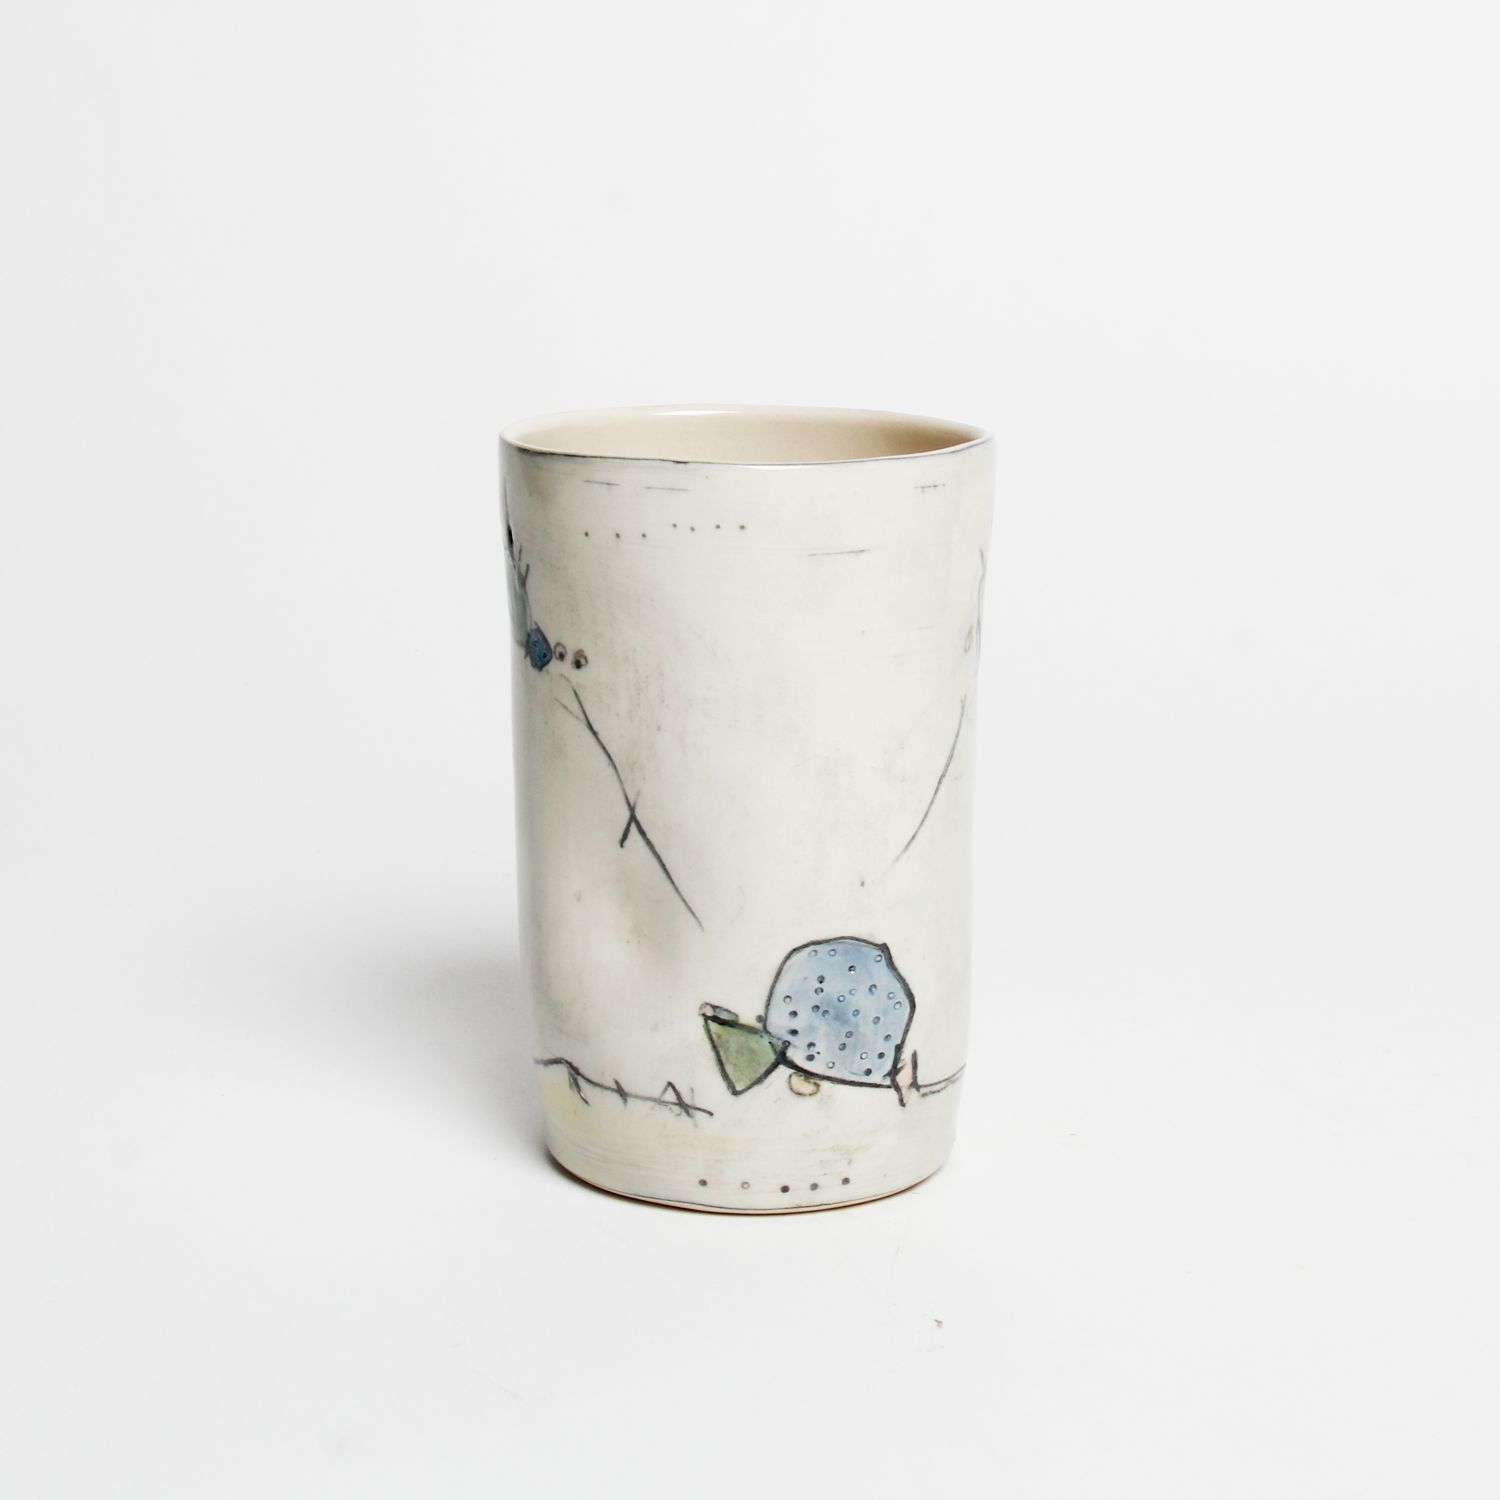 Stephen Hawes: Tall Cup Product Image 4 of 4